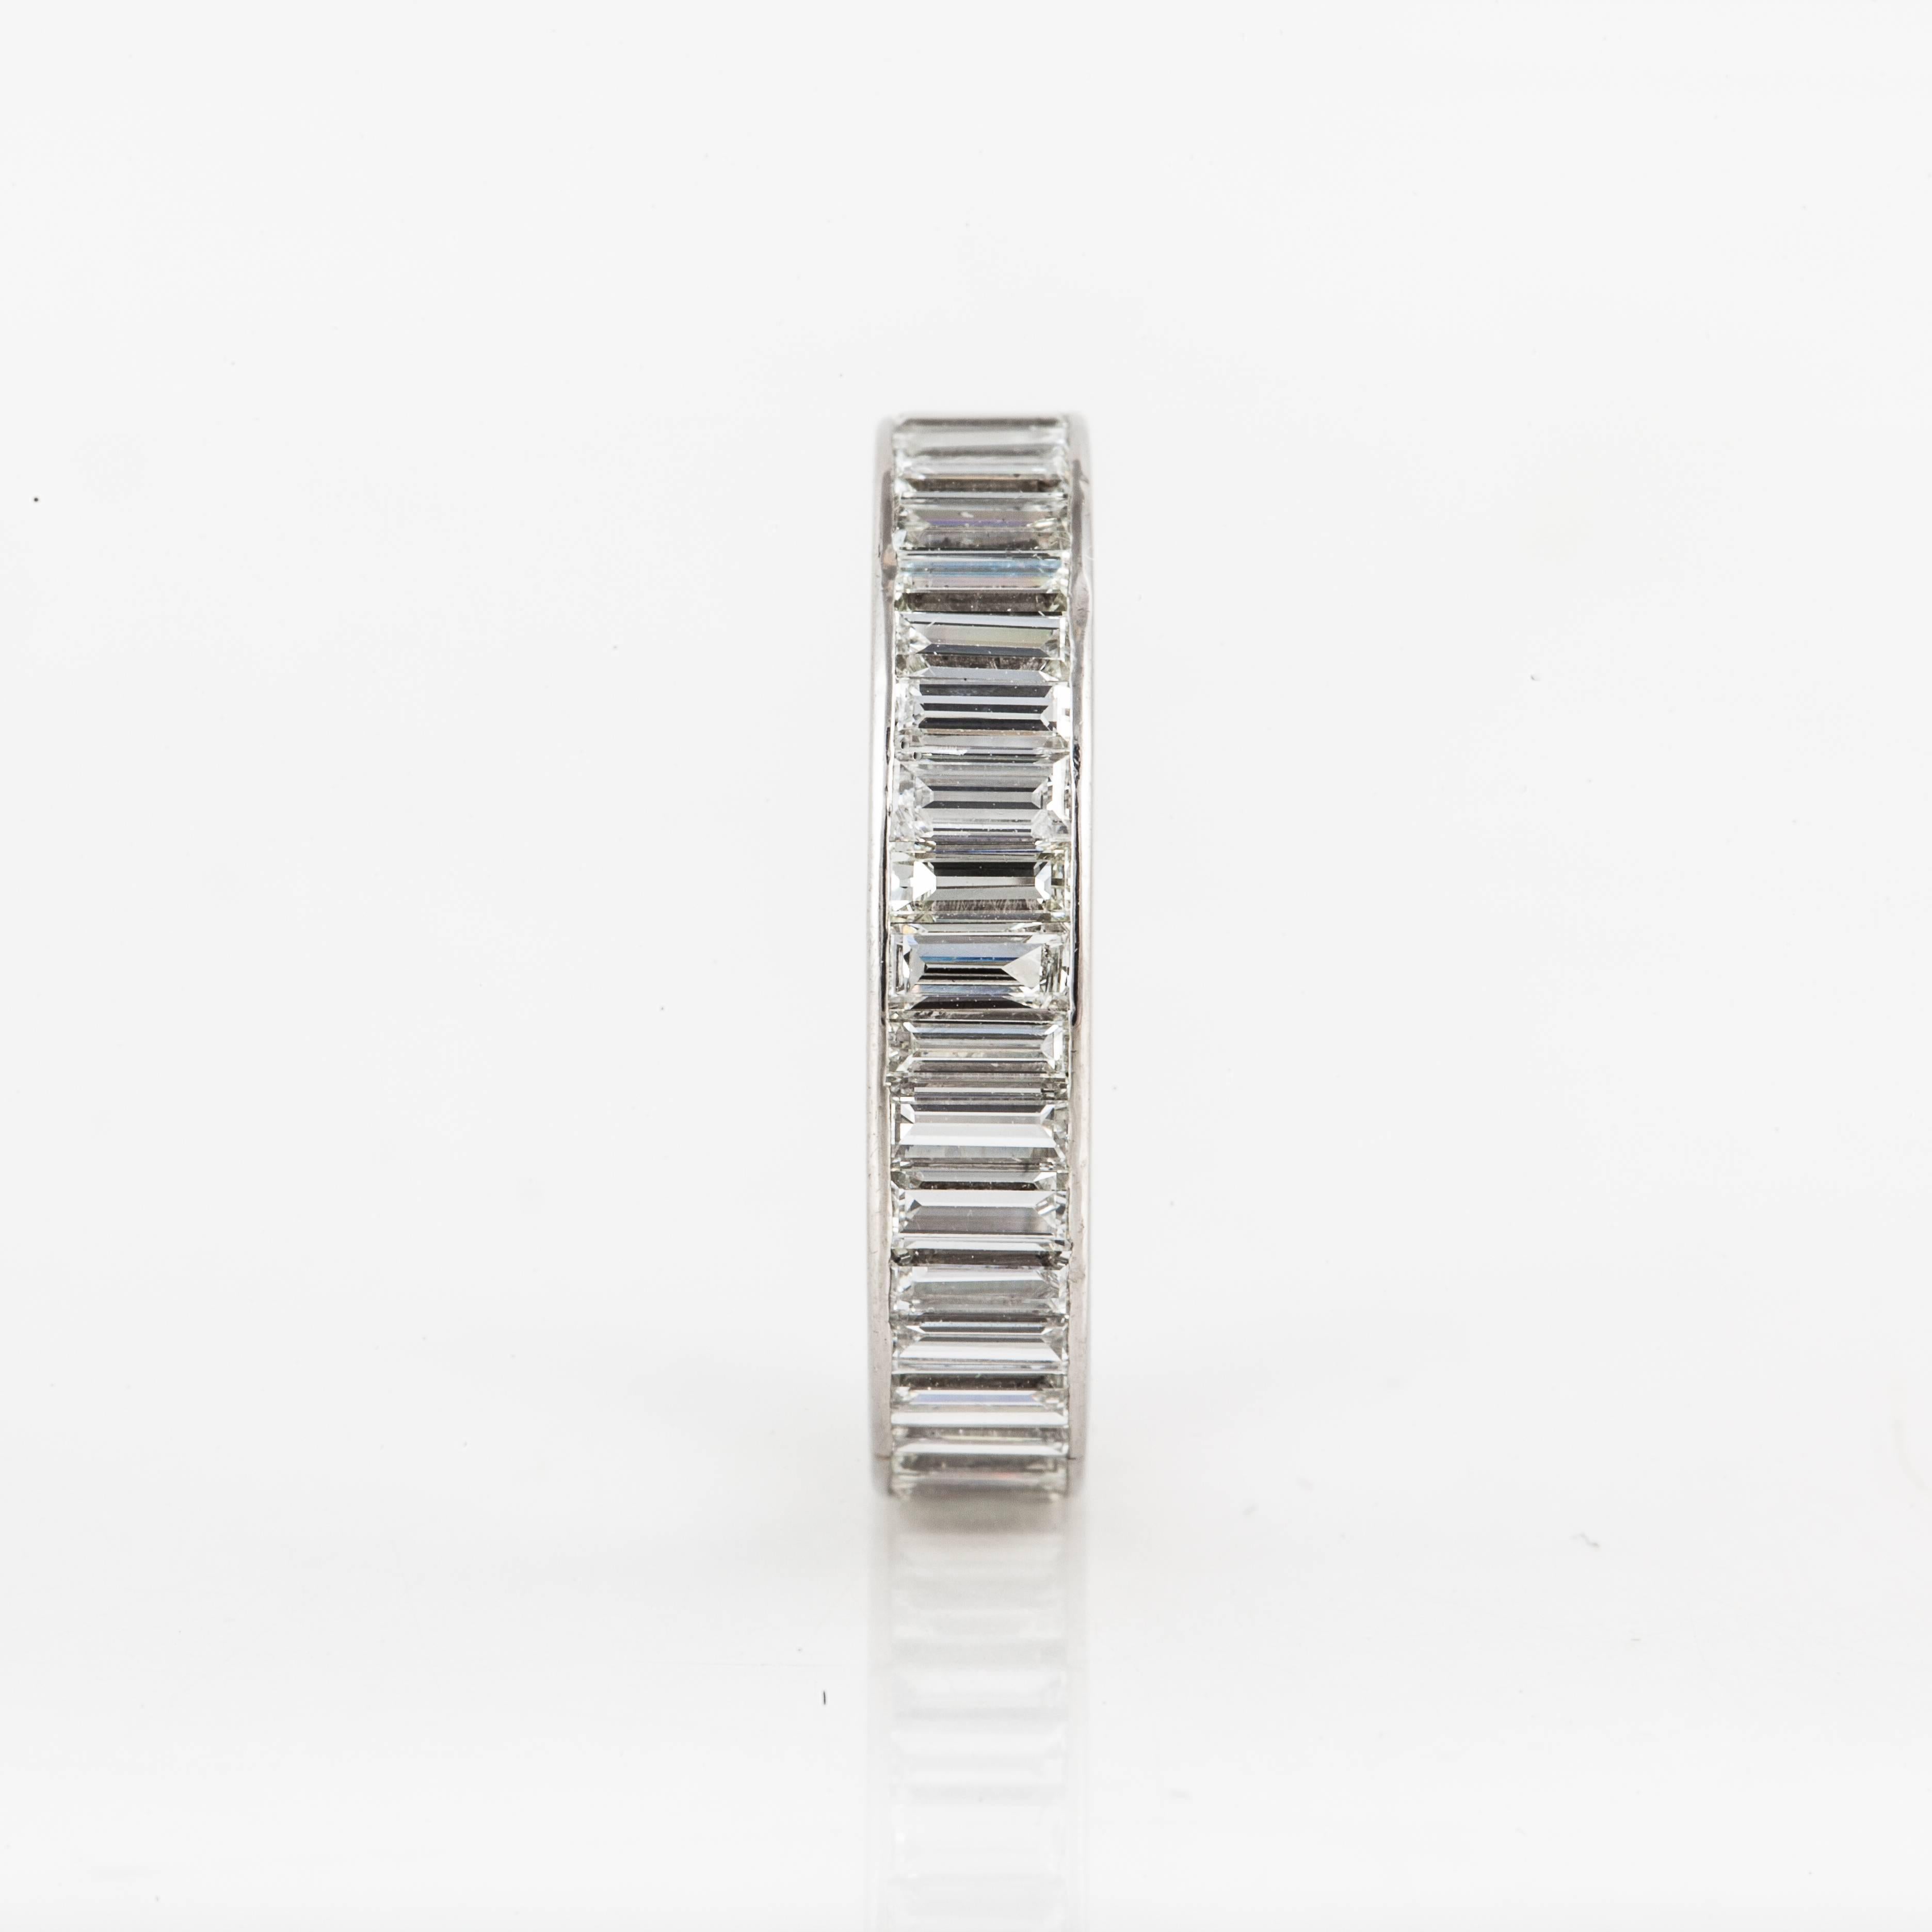 Van Cleef & Arpels eternity band featuring baguette diamonds in platinum.  It is marked around the outer edge 